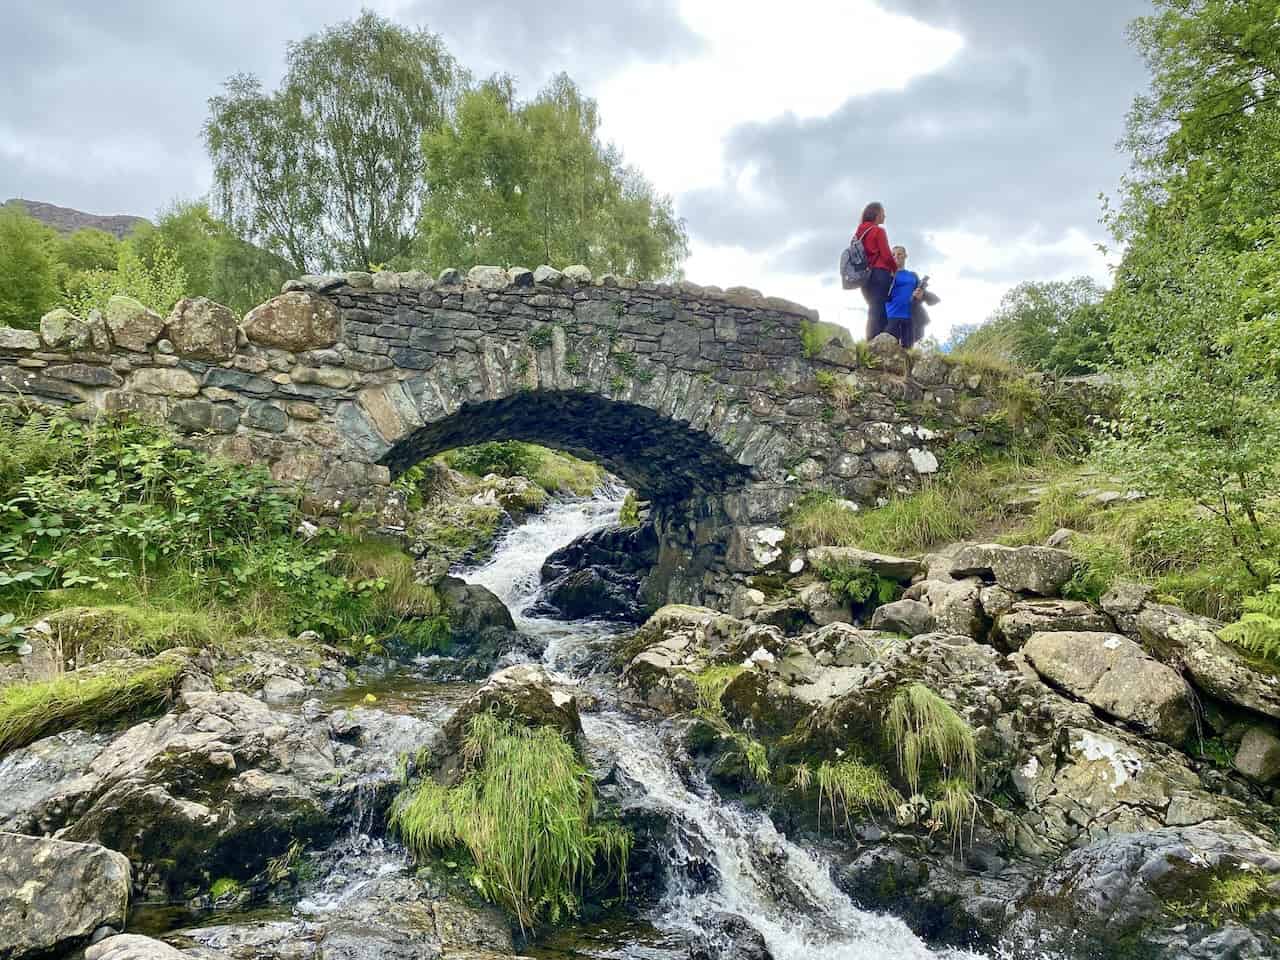 Ashness Bridge, a traditional stone-built packhorse bridge striding Barrow Beck. This location is a highlight of the Walla Crag walk.